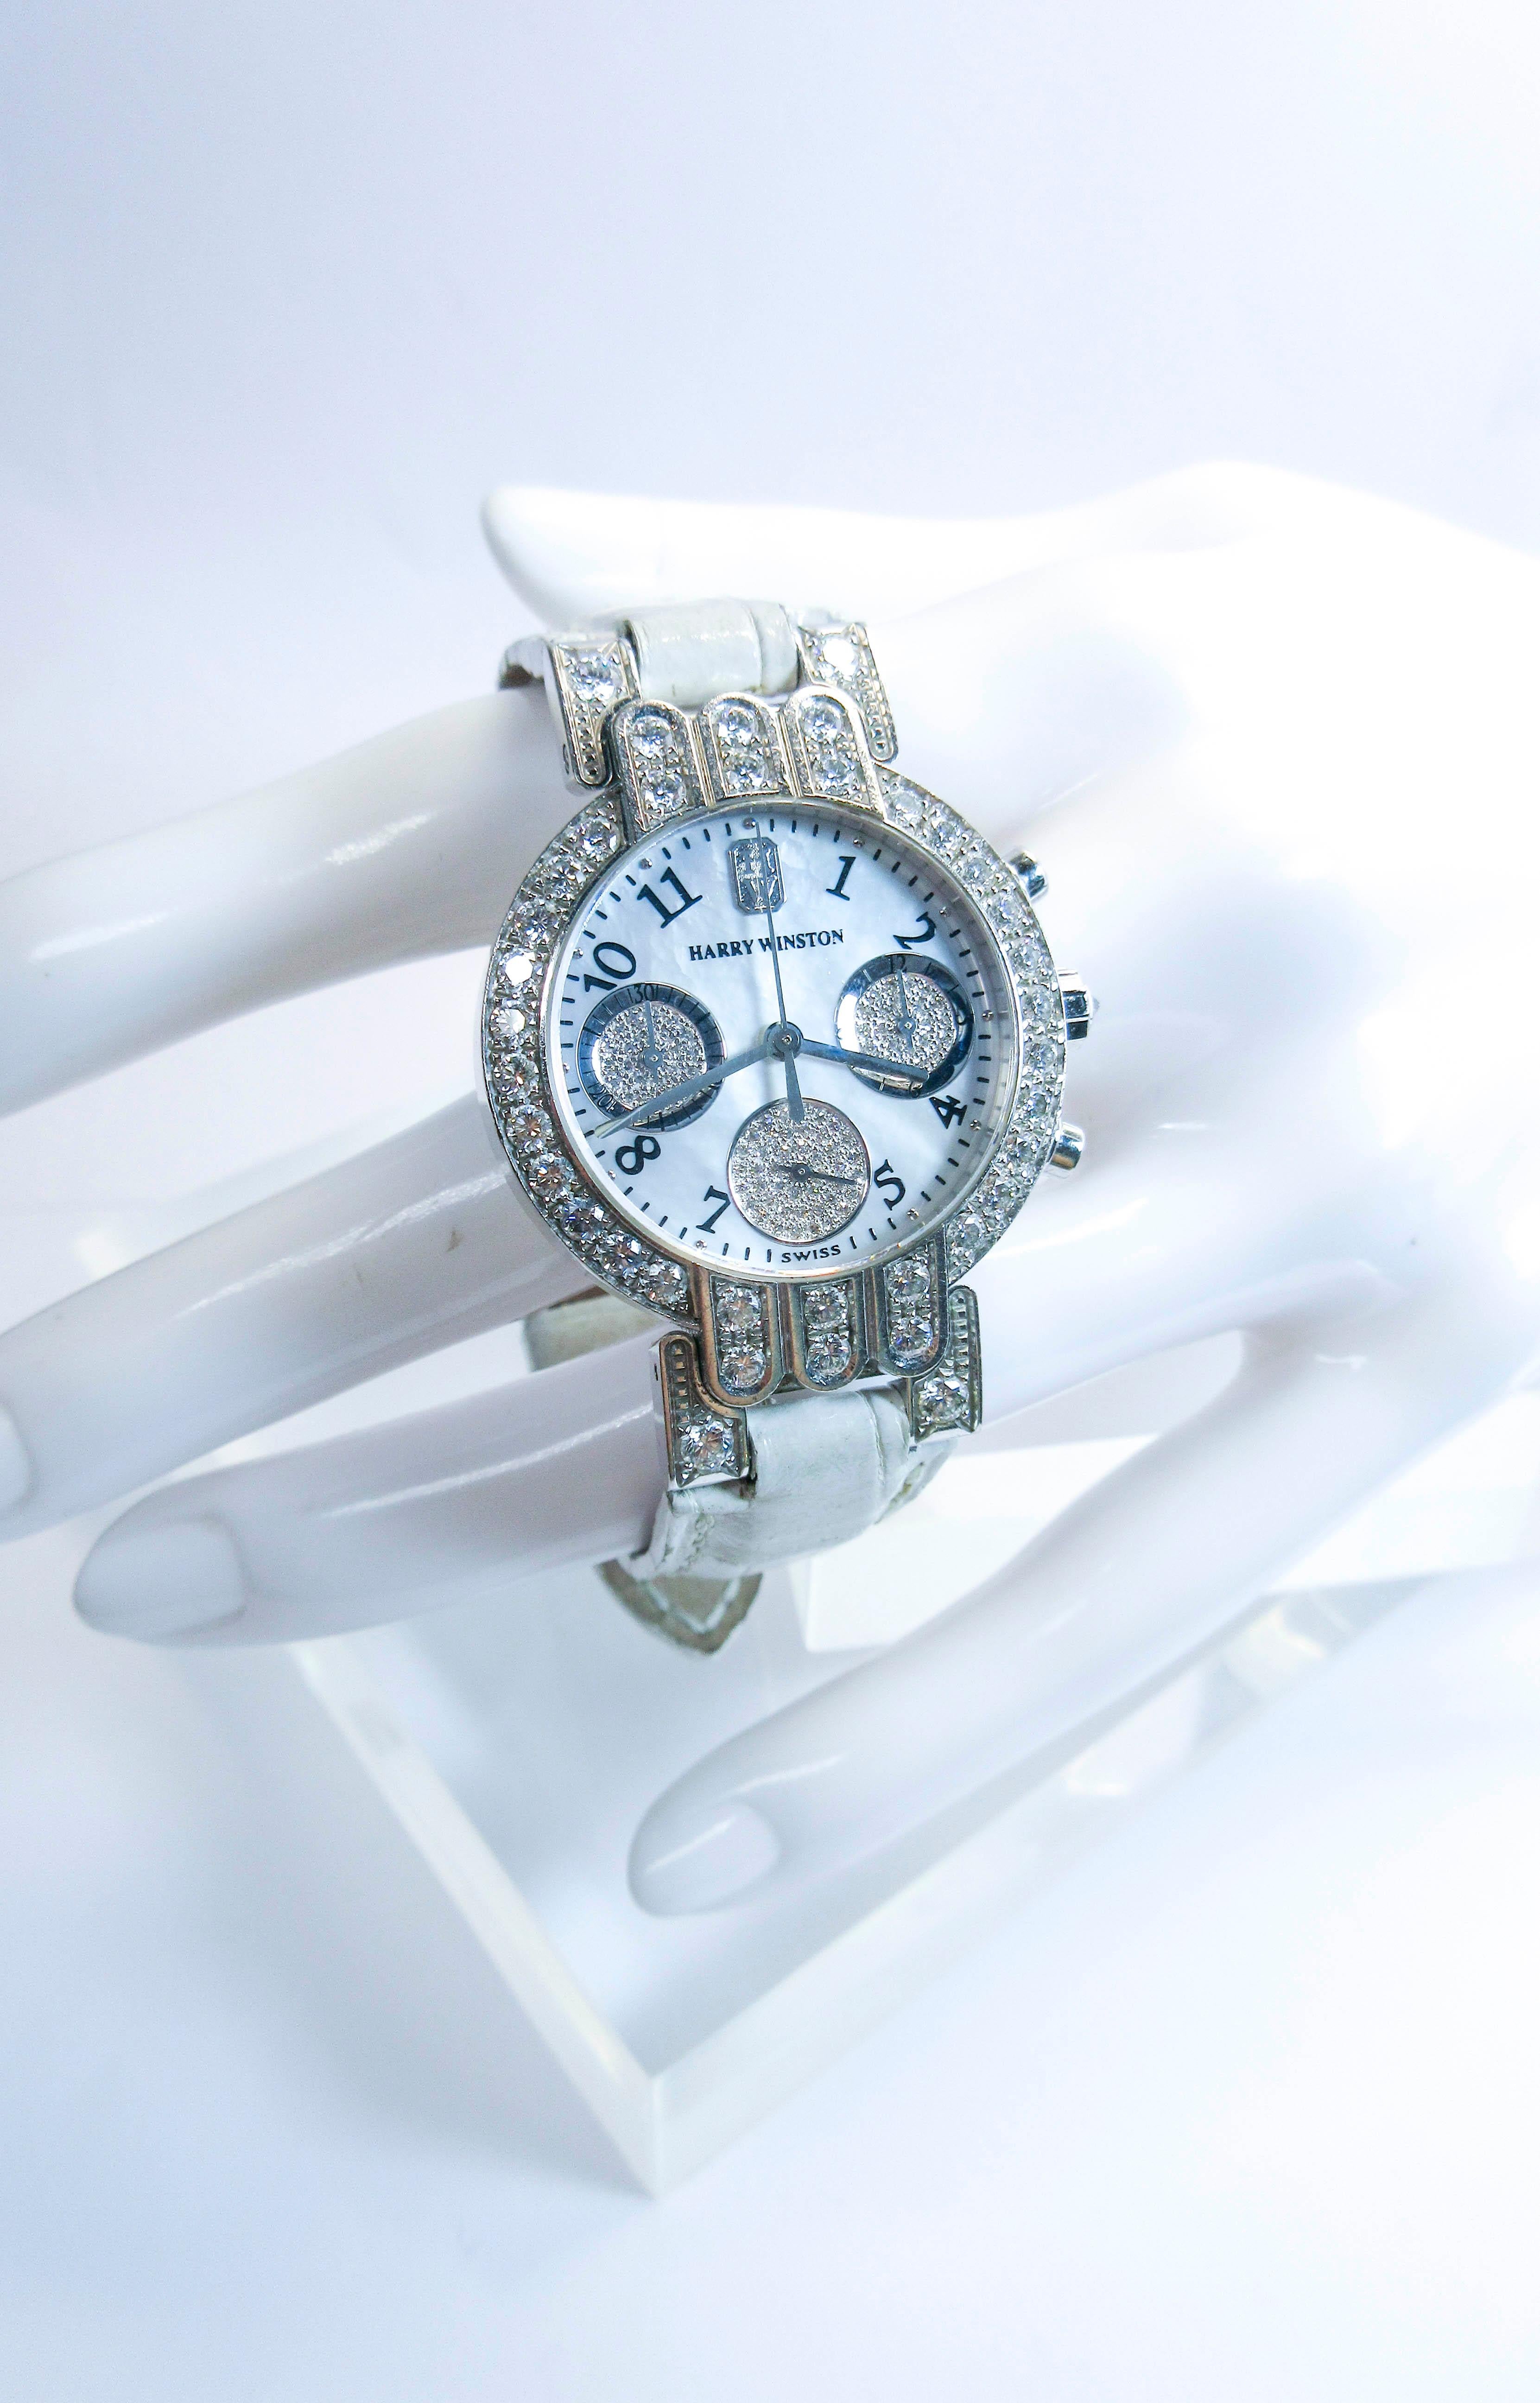 This Harry Winston watch is composed of 18KT white gold with pave diamond accents and a Mother of Pearl face. Comes with a white exotic alligator band. 
The watch is battery operated.

Please feel free to ask us any additional questions you may